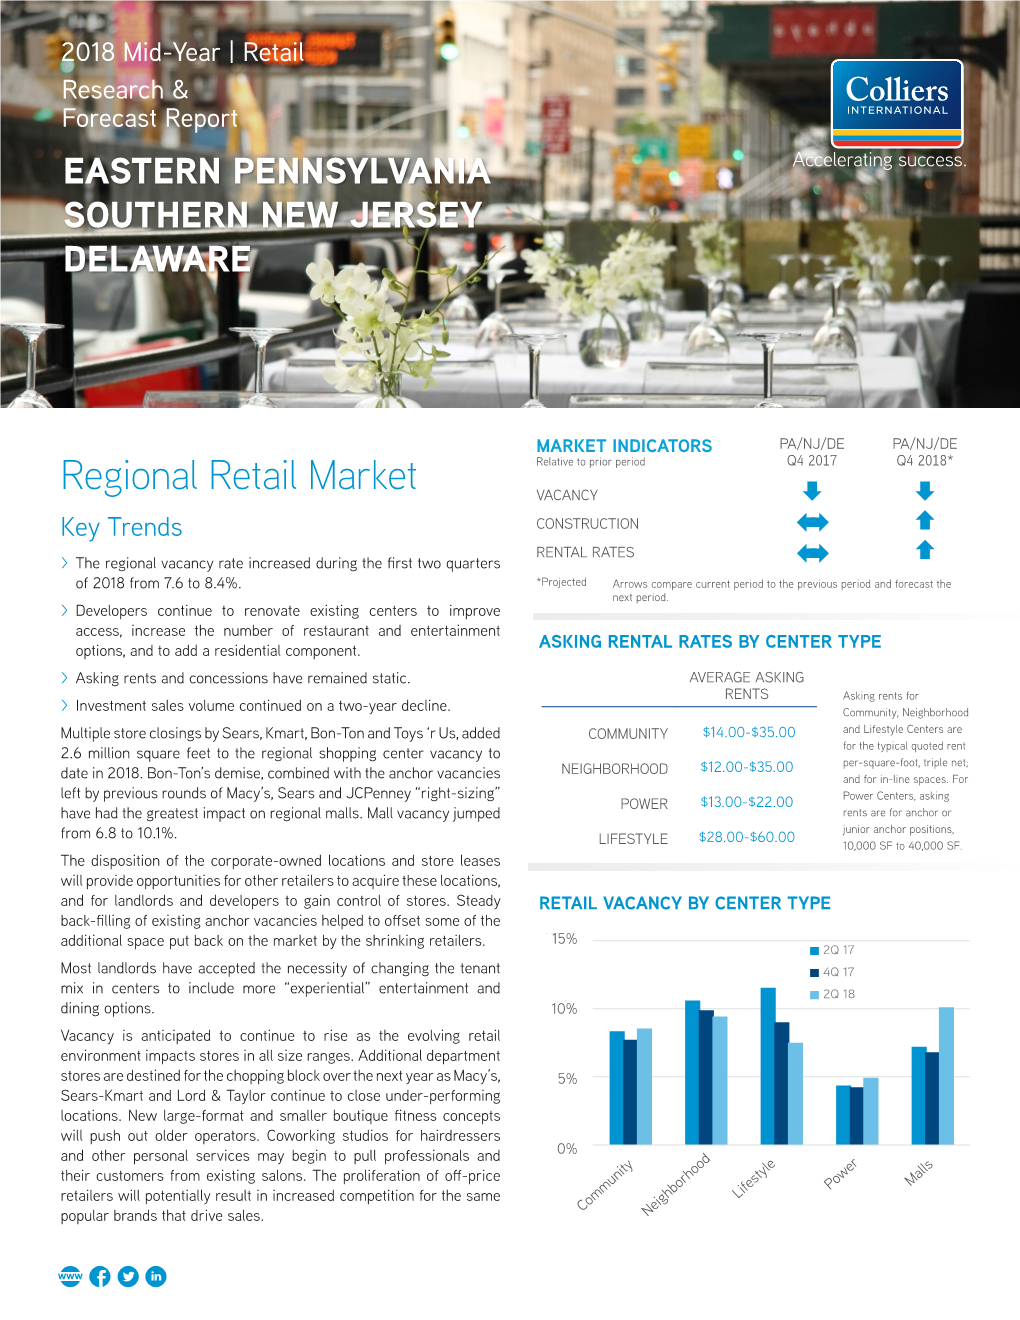 Regional Retail Market VACANCY Key Trends CONSTRUCTION RENTAL RATES >> the Regional Vacancy Rate Increased During the First Two Quarters of 2018 from 7.6 to 8.4%